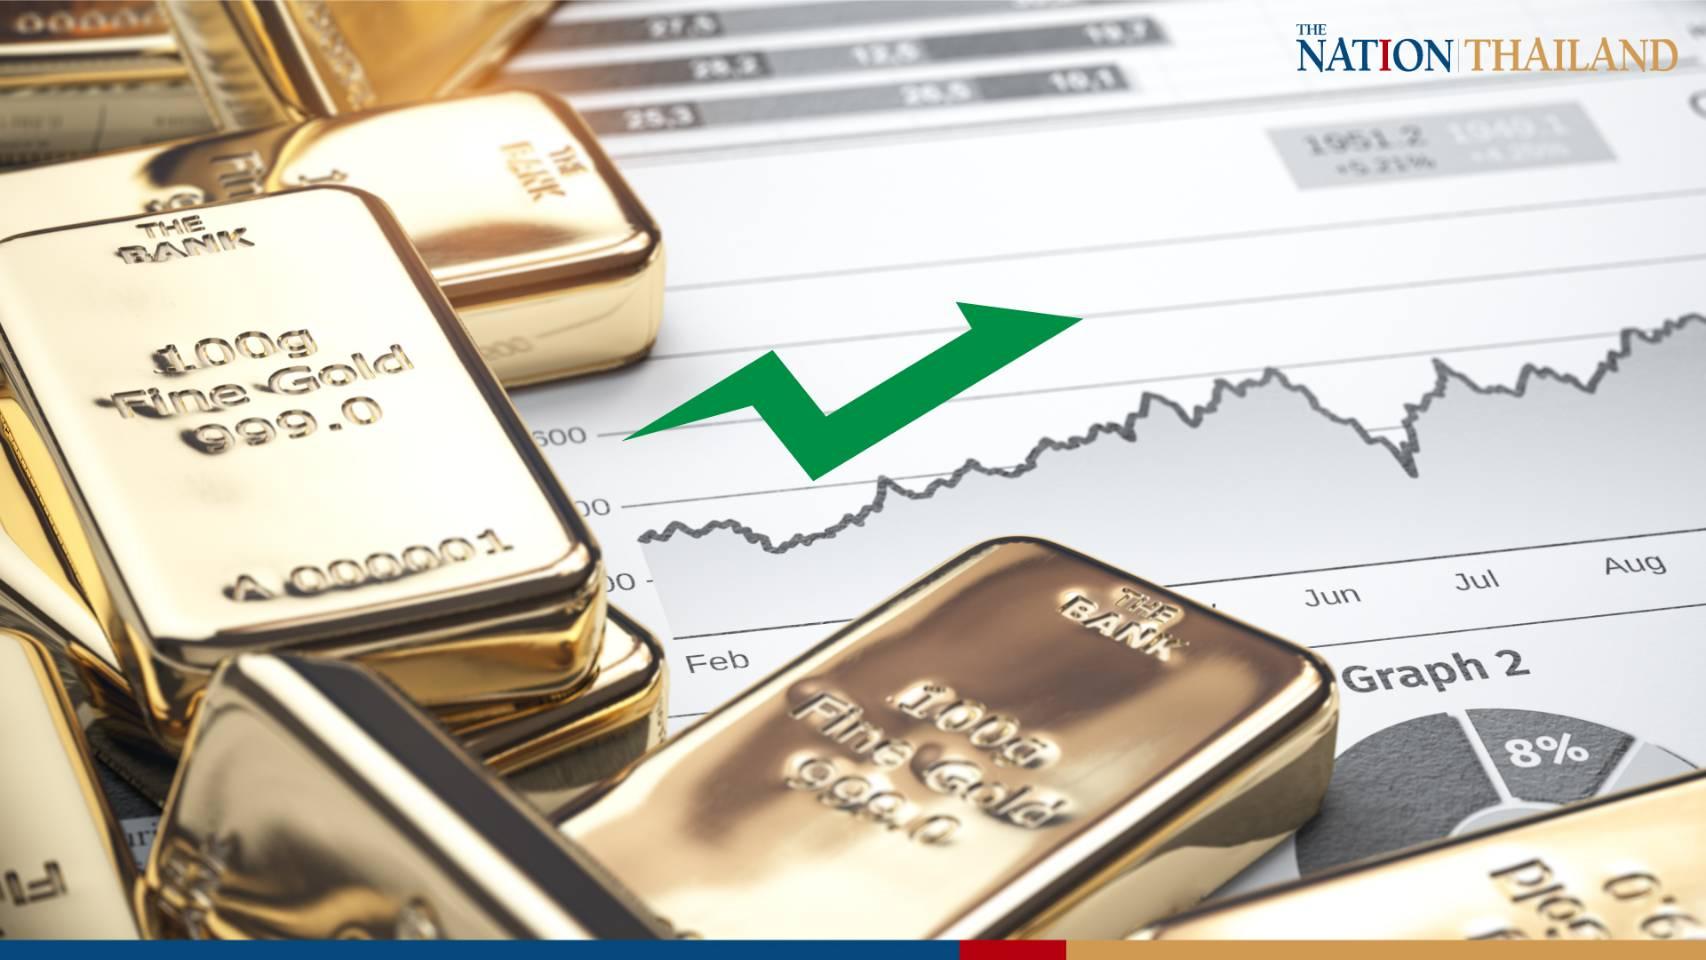 Gold continues last weeks upward trend despite sell-offs